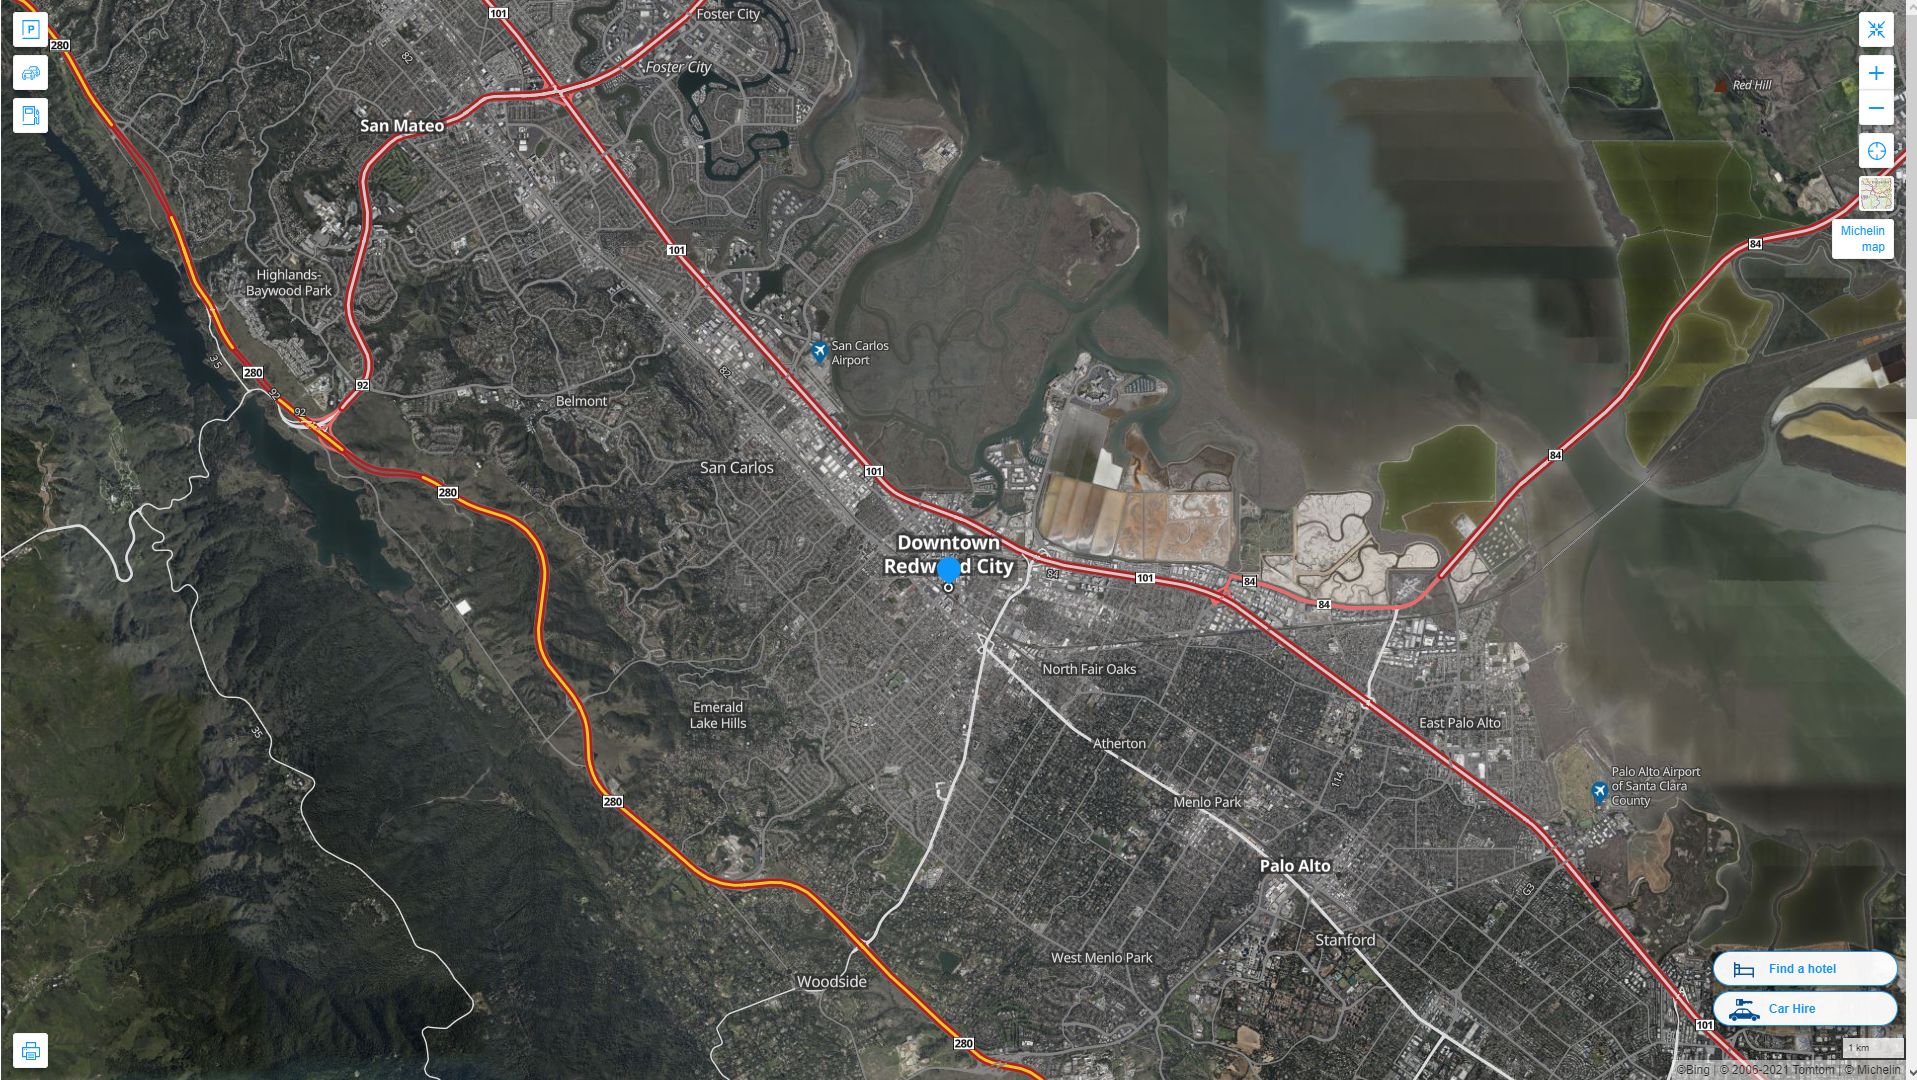 Redwood City California Highway and Road Map with Satellite View